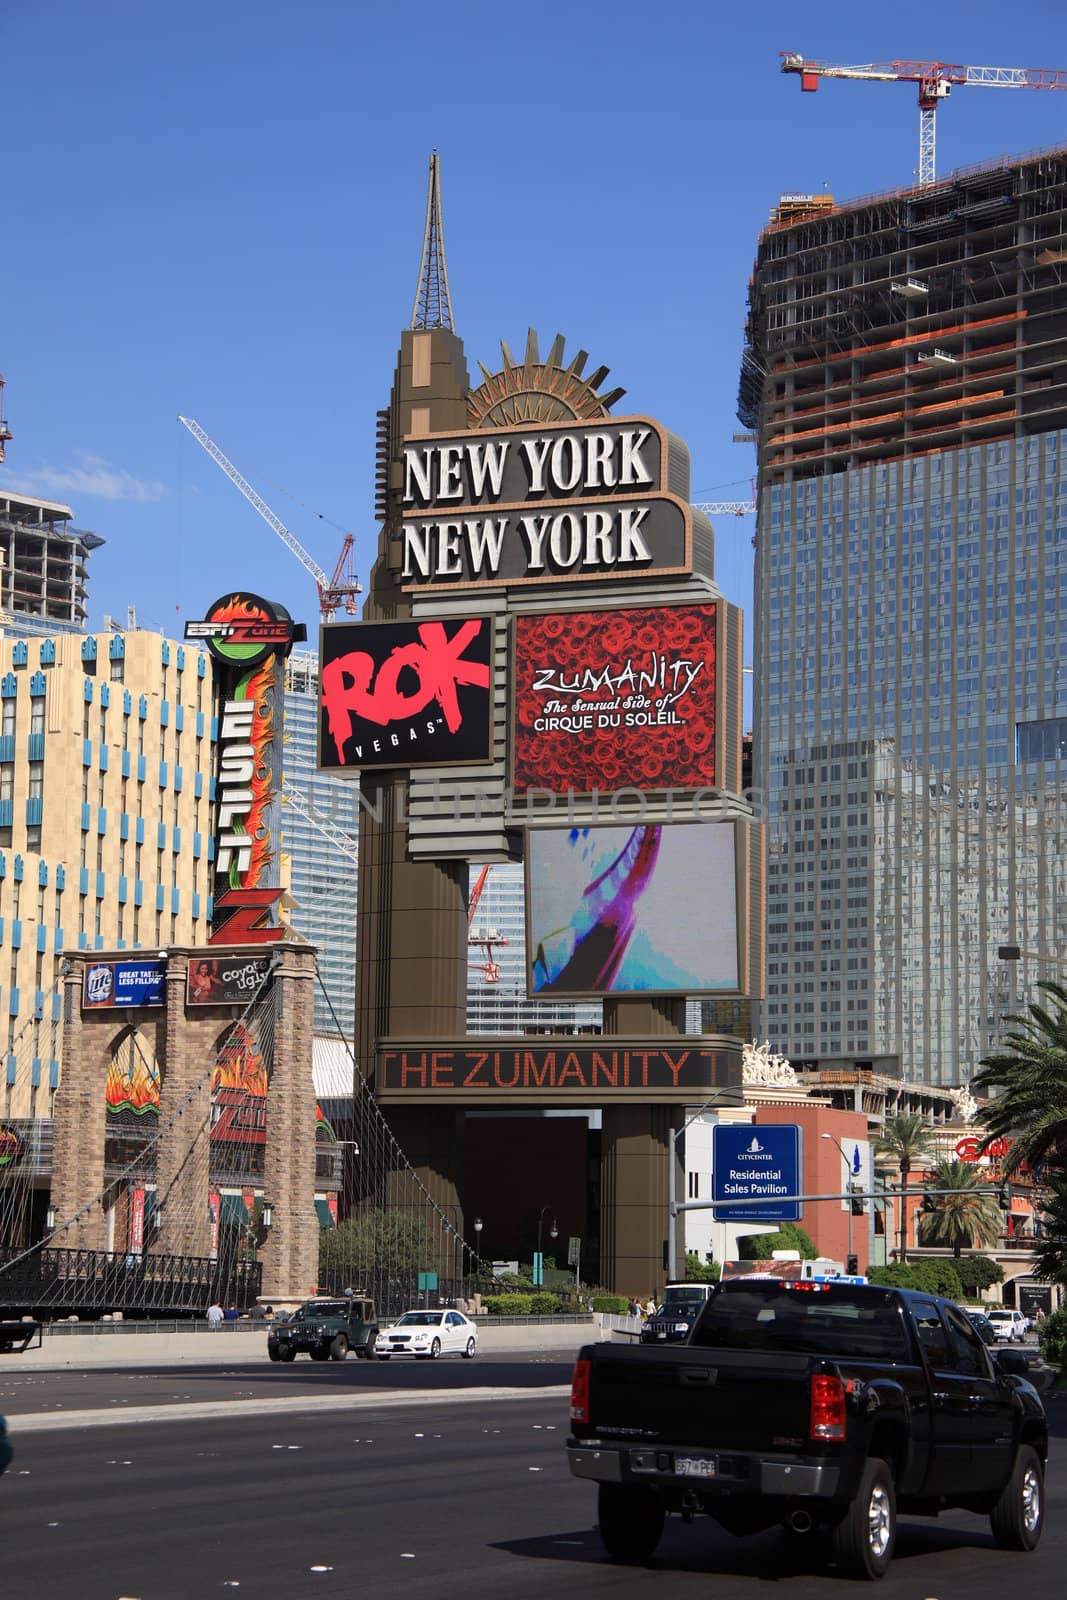 Las Vegas - New York Hotel by Ffooter